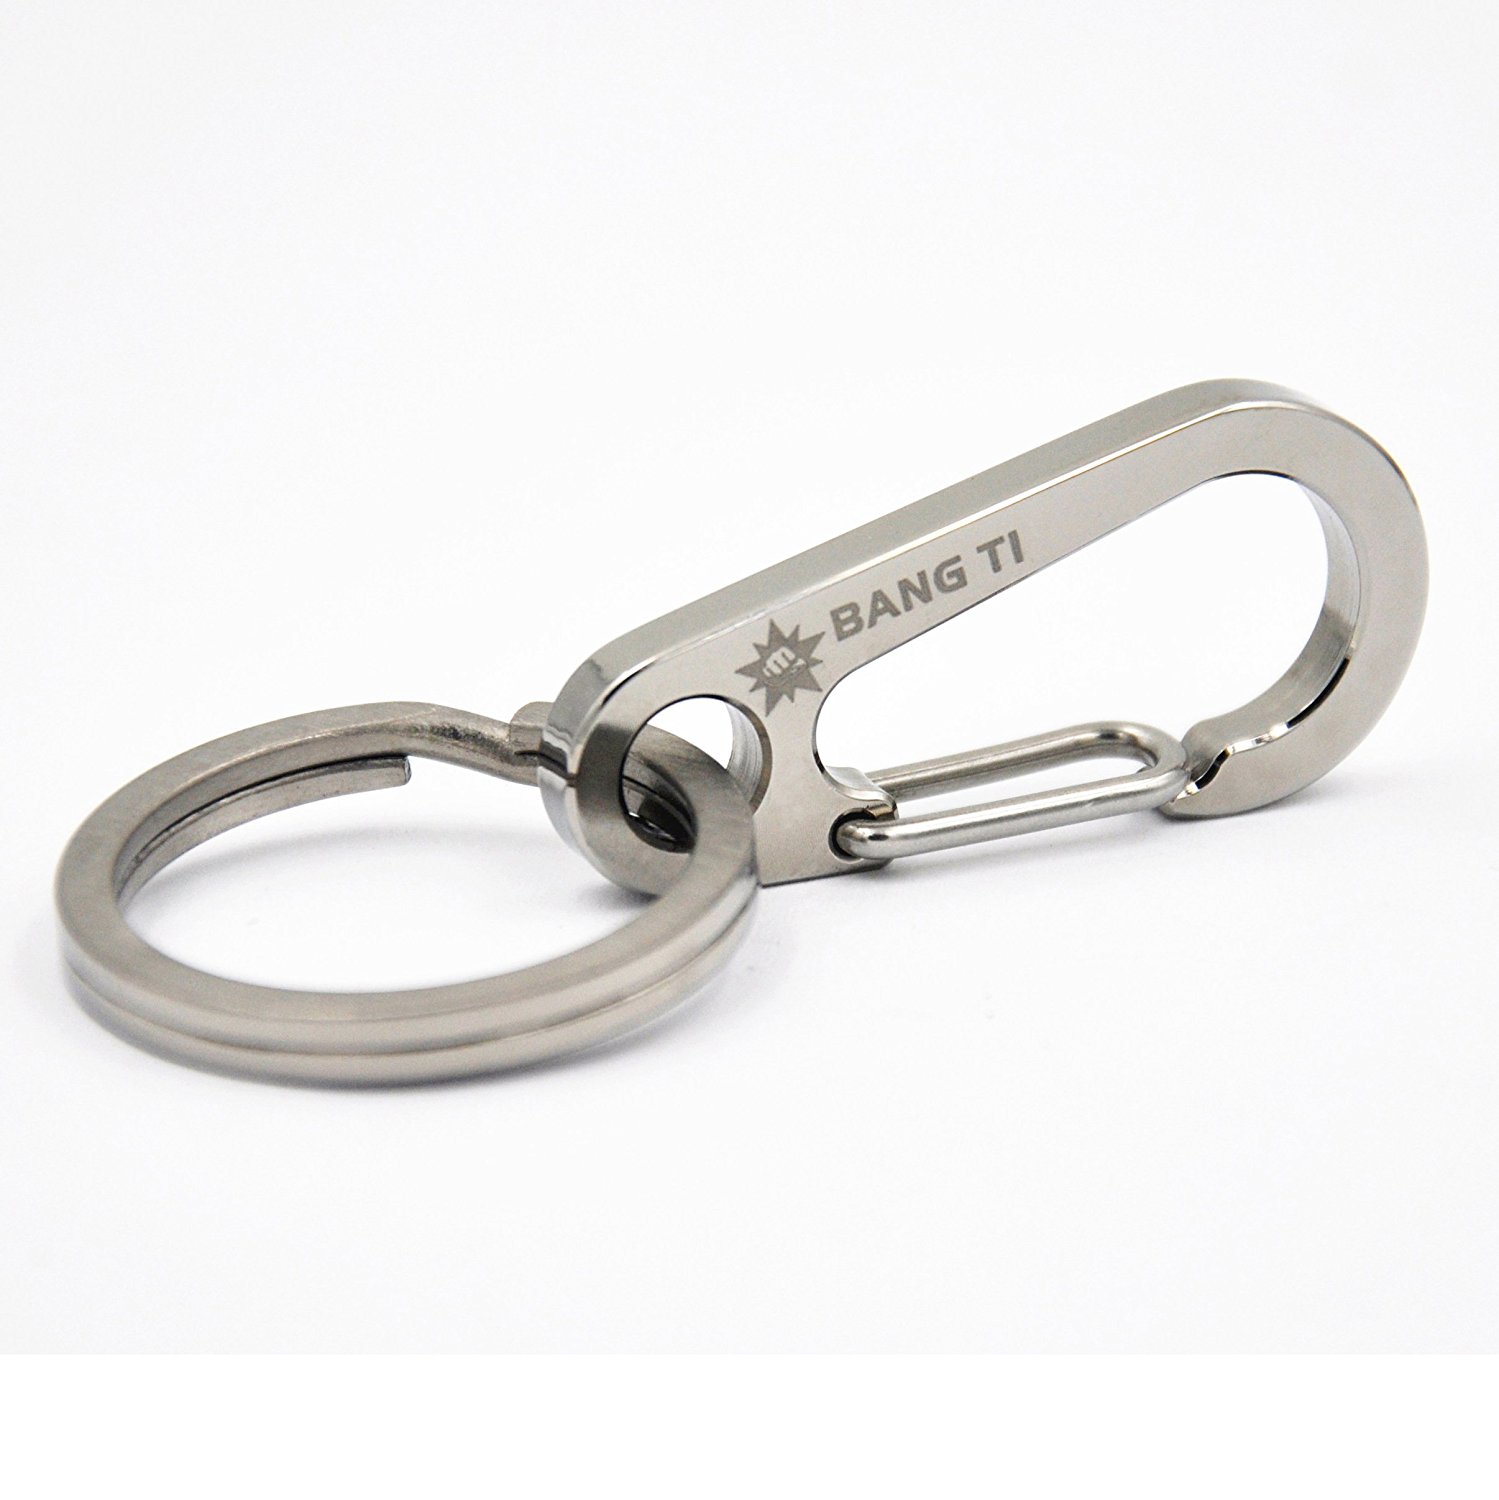 Bang-Ti-45mm-Titanium-Quick-Release-Keychain-Key-Clip-with-32mm-Ti-Keyring-1150897